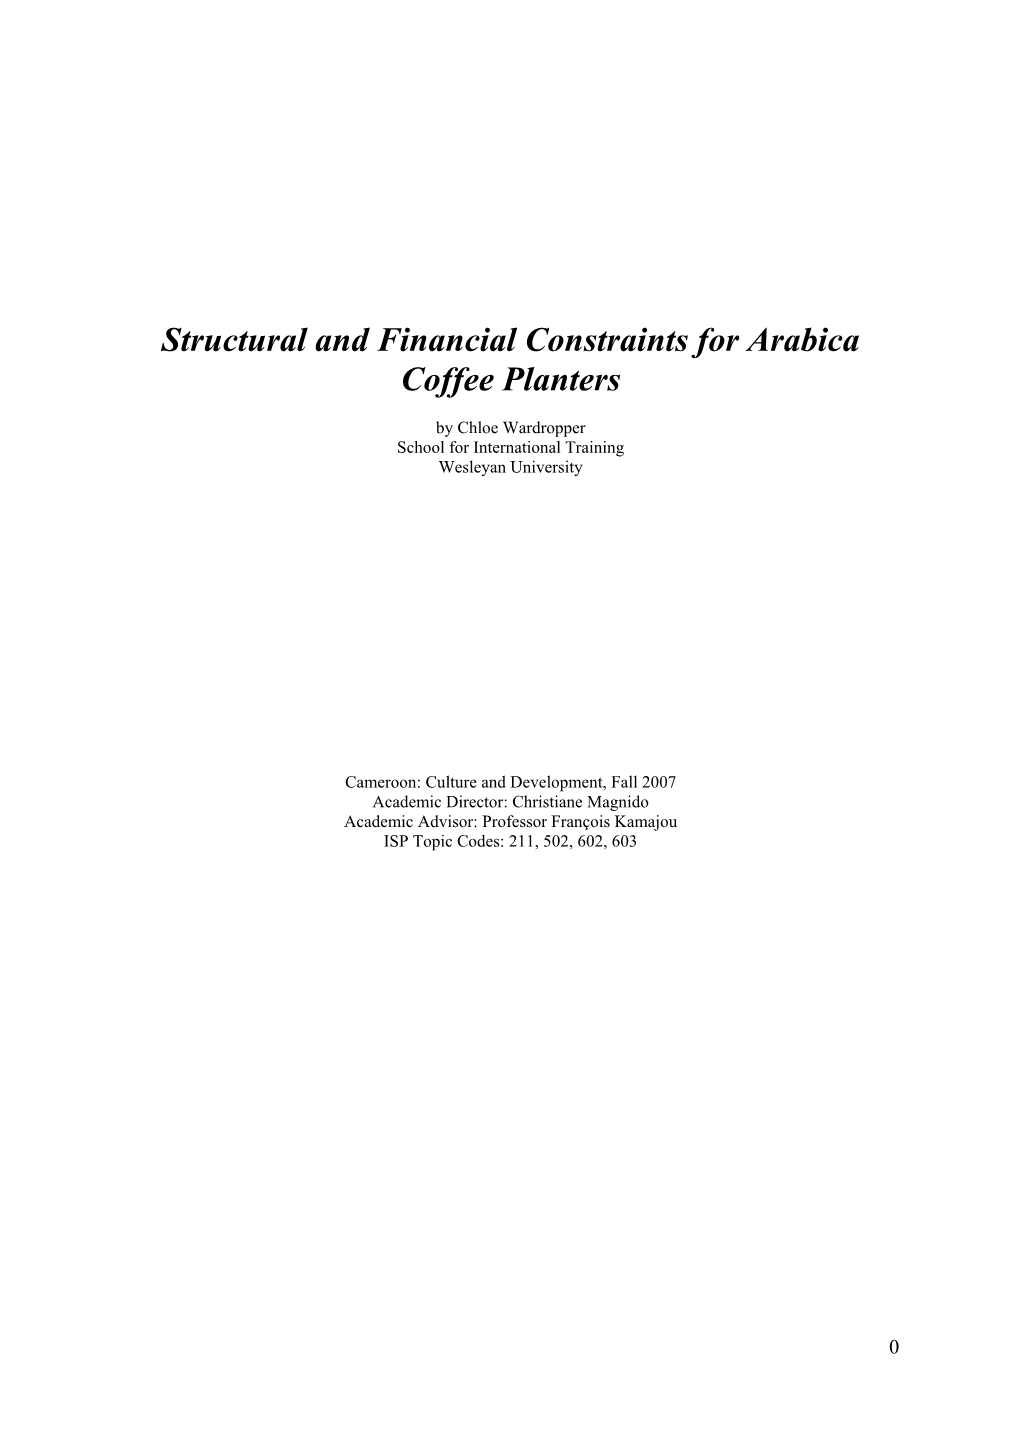 Structural and Financial Constraints for Arabica Coffee Planters